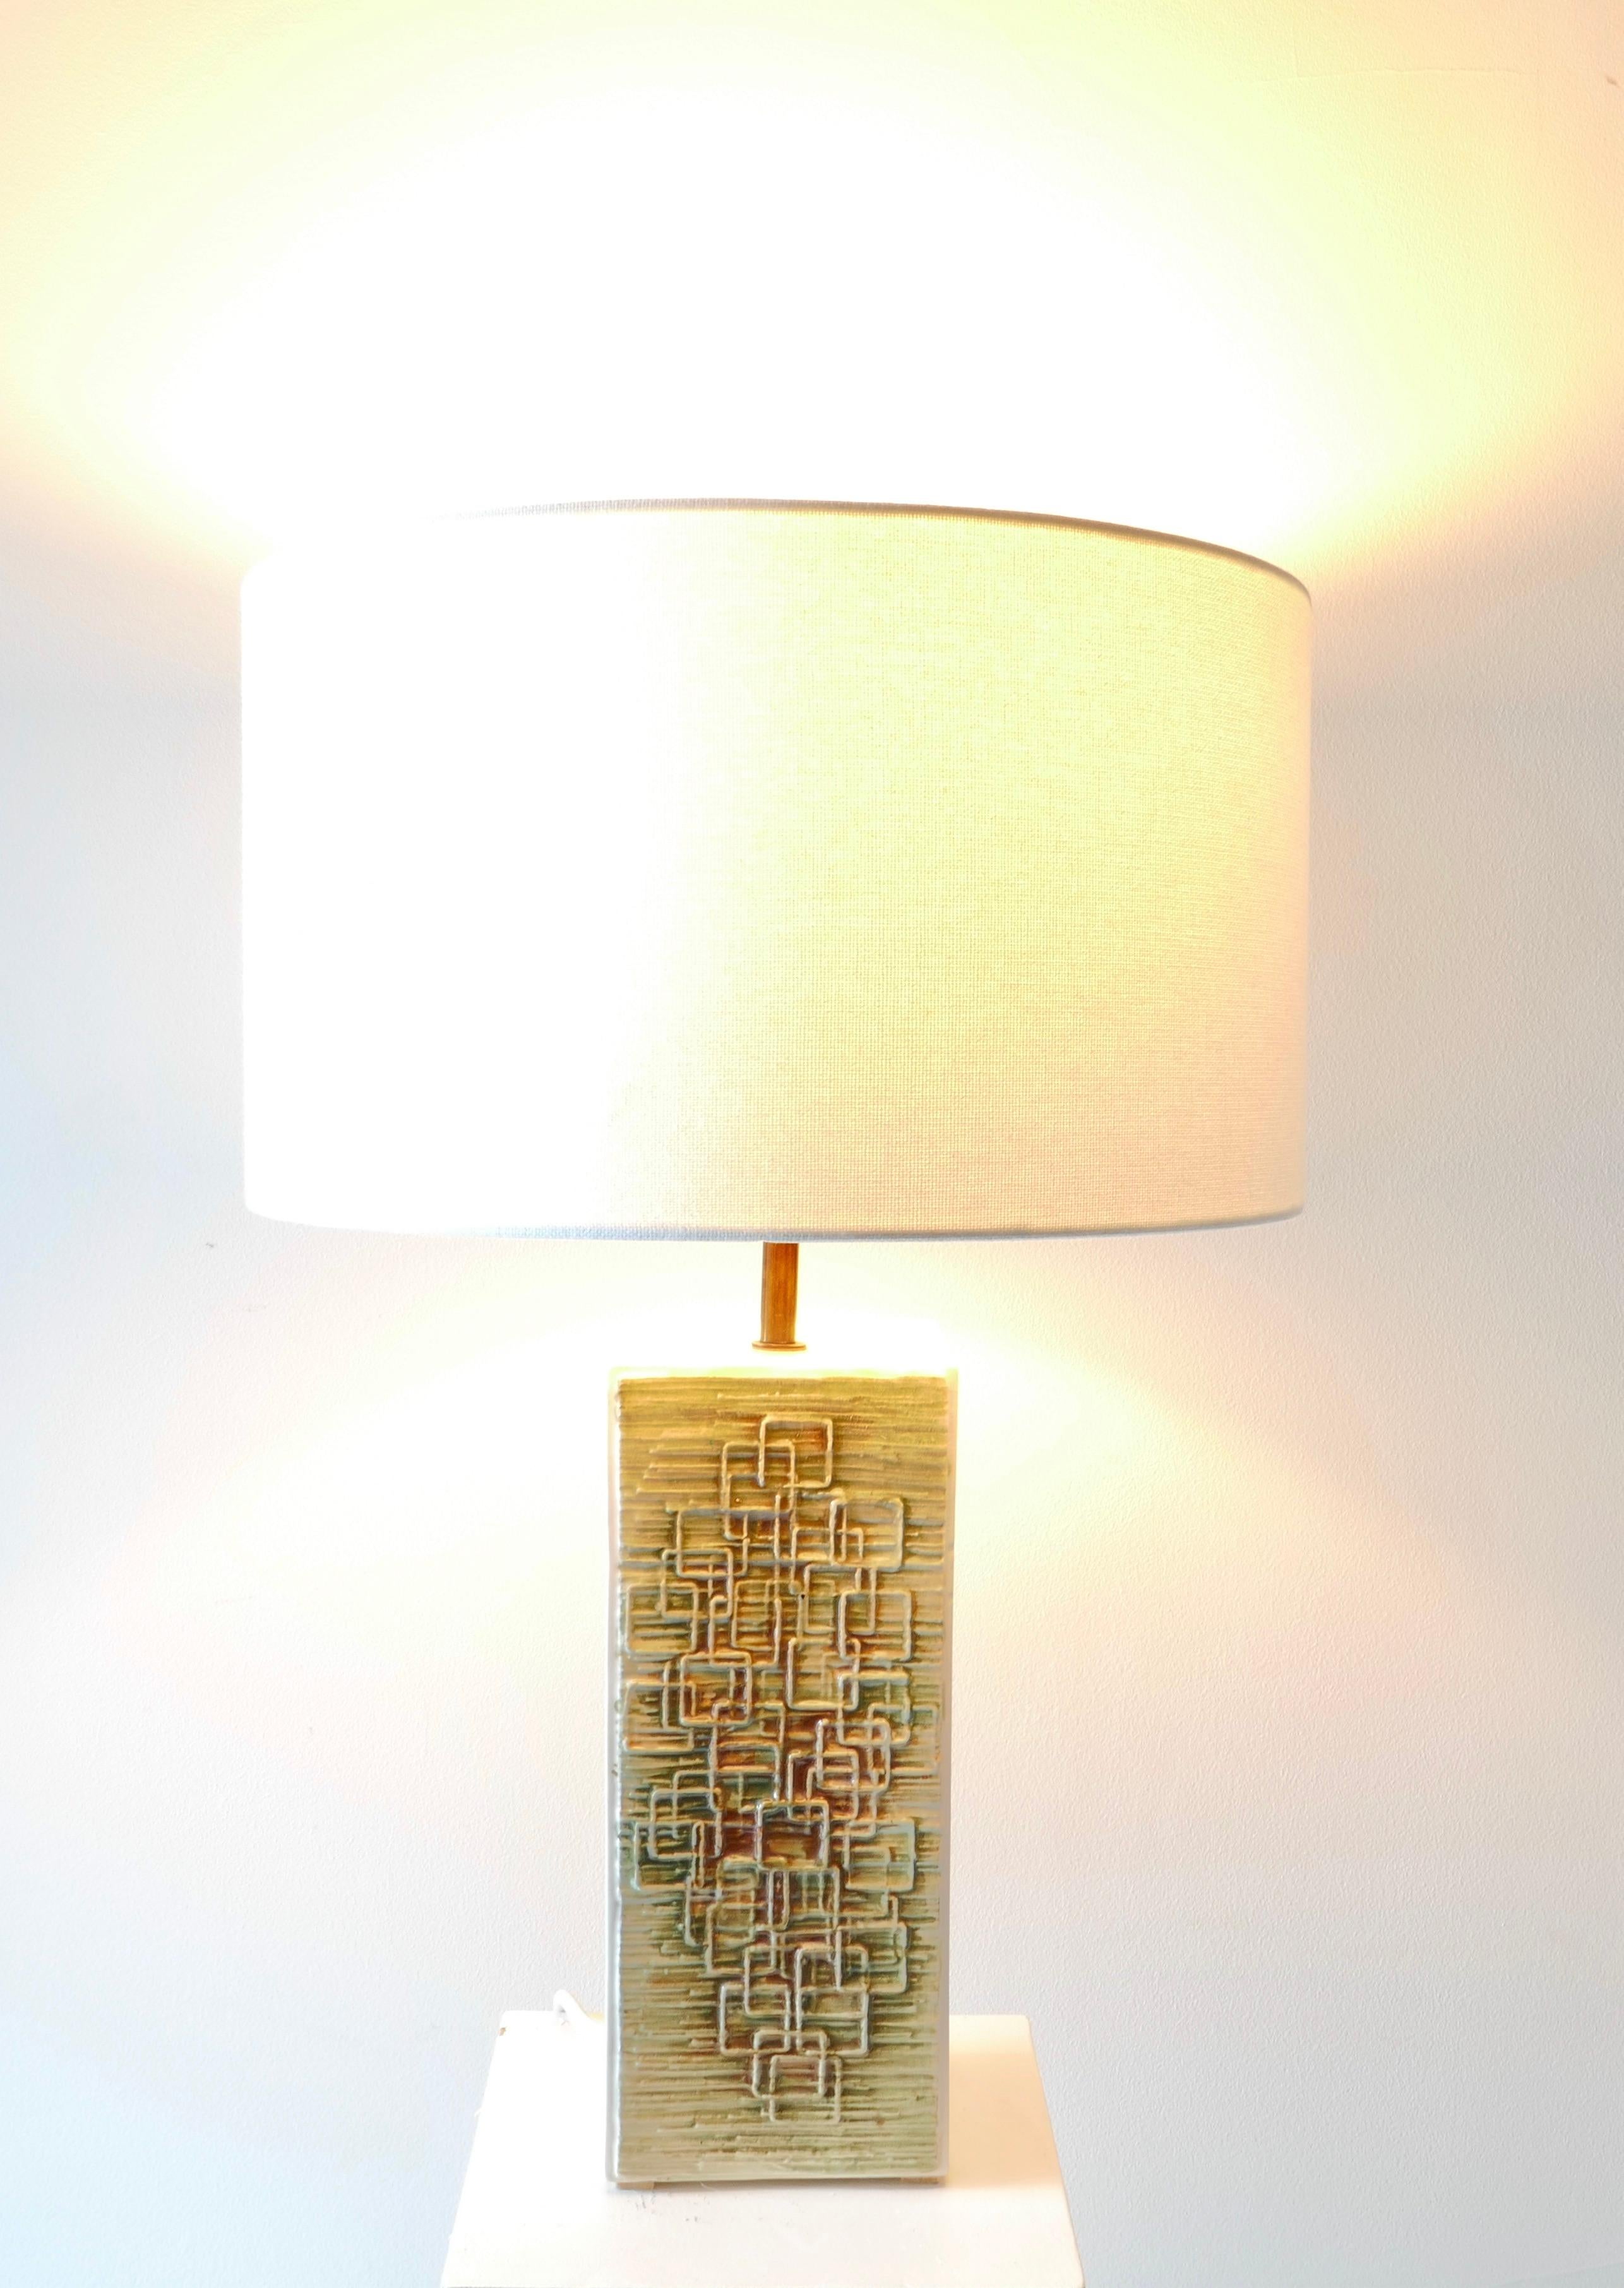 Green Tone Ceramic Table Lamp, 1960s For Sale 2